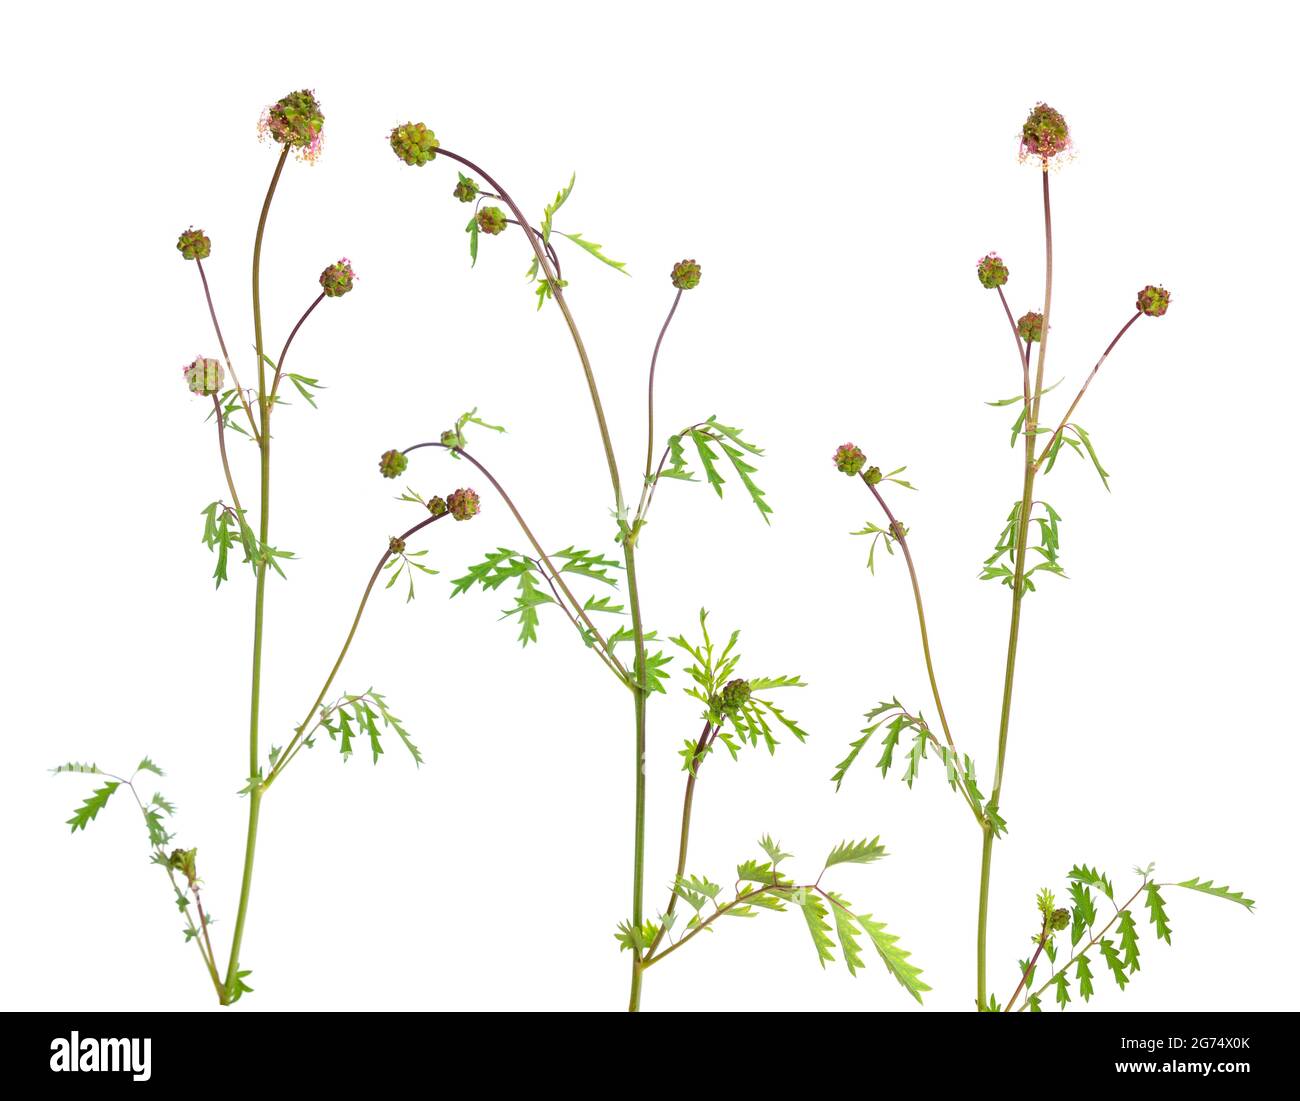 Sanguisorba officinalis, commonly known as great burnet. Isolated on white background. Stock Photo